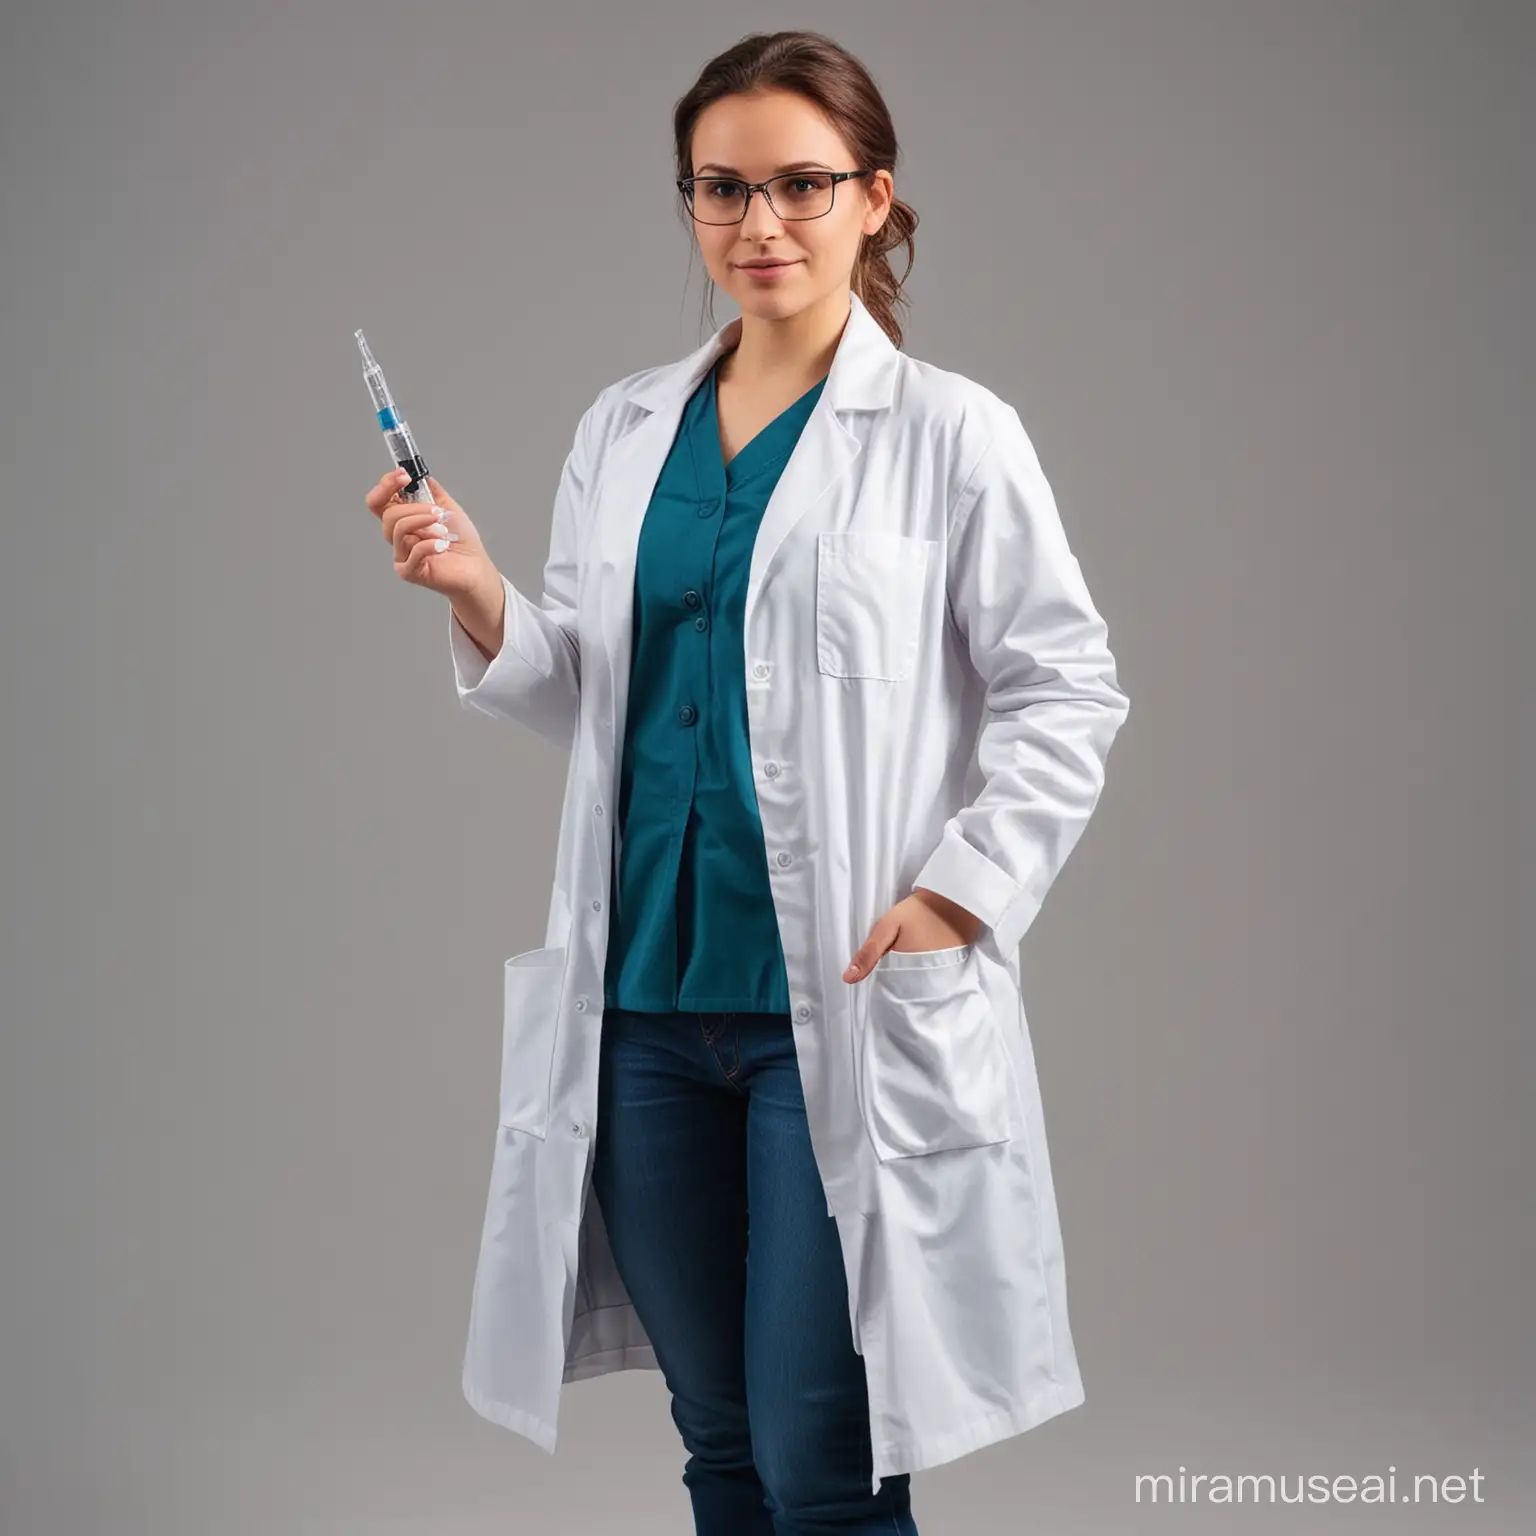 Full body Female chemist. pose just one hand in her lab coat pocket and the other holding a syringe.